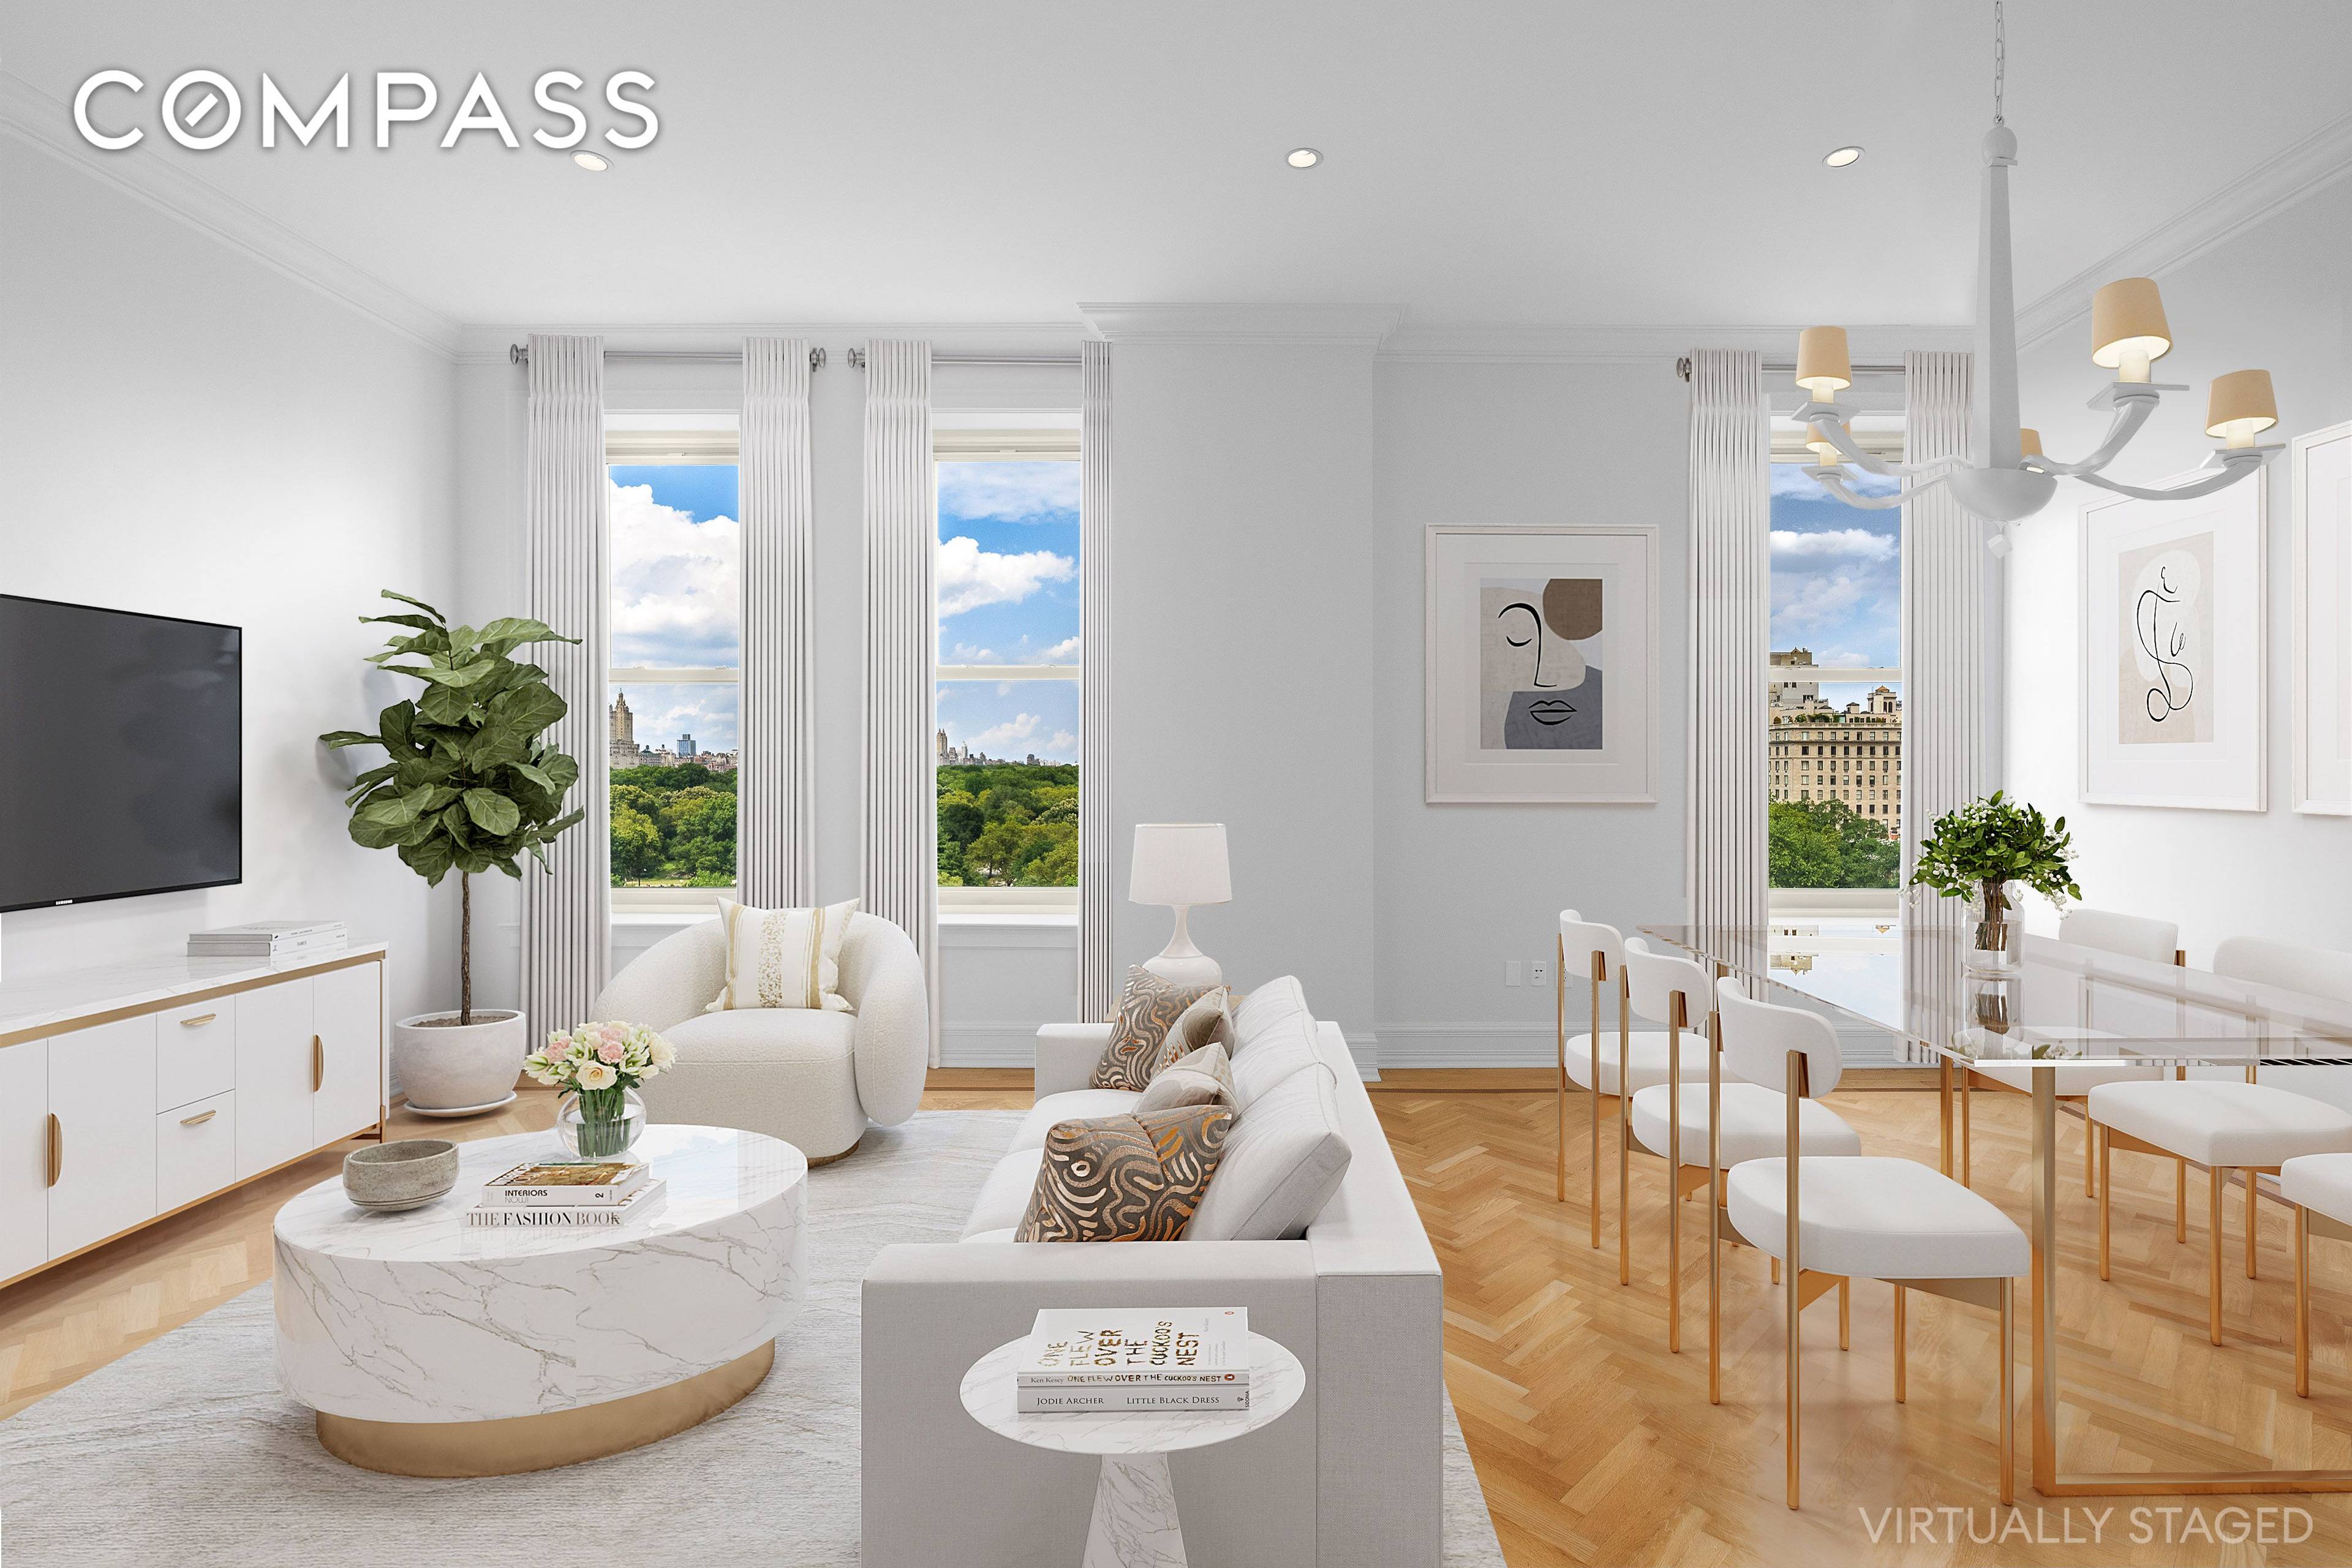 Residence 905 at the iconic Plaza private residences offers stunning views overlooking Central Park through its four oversized windows.